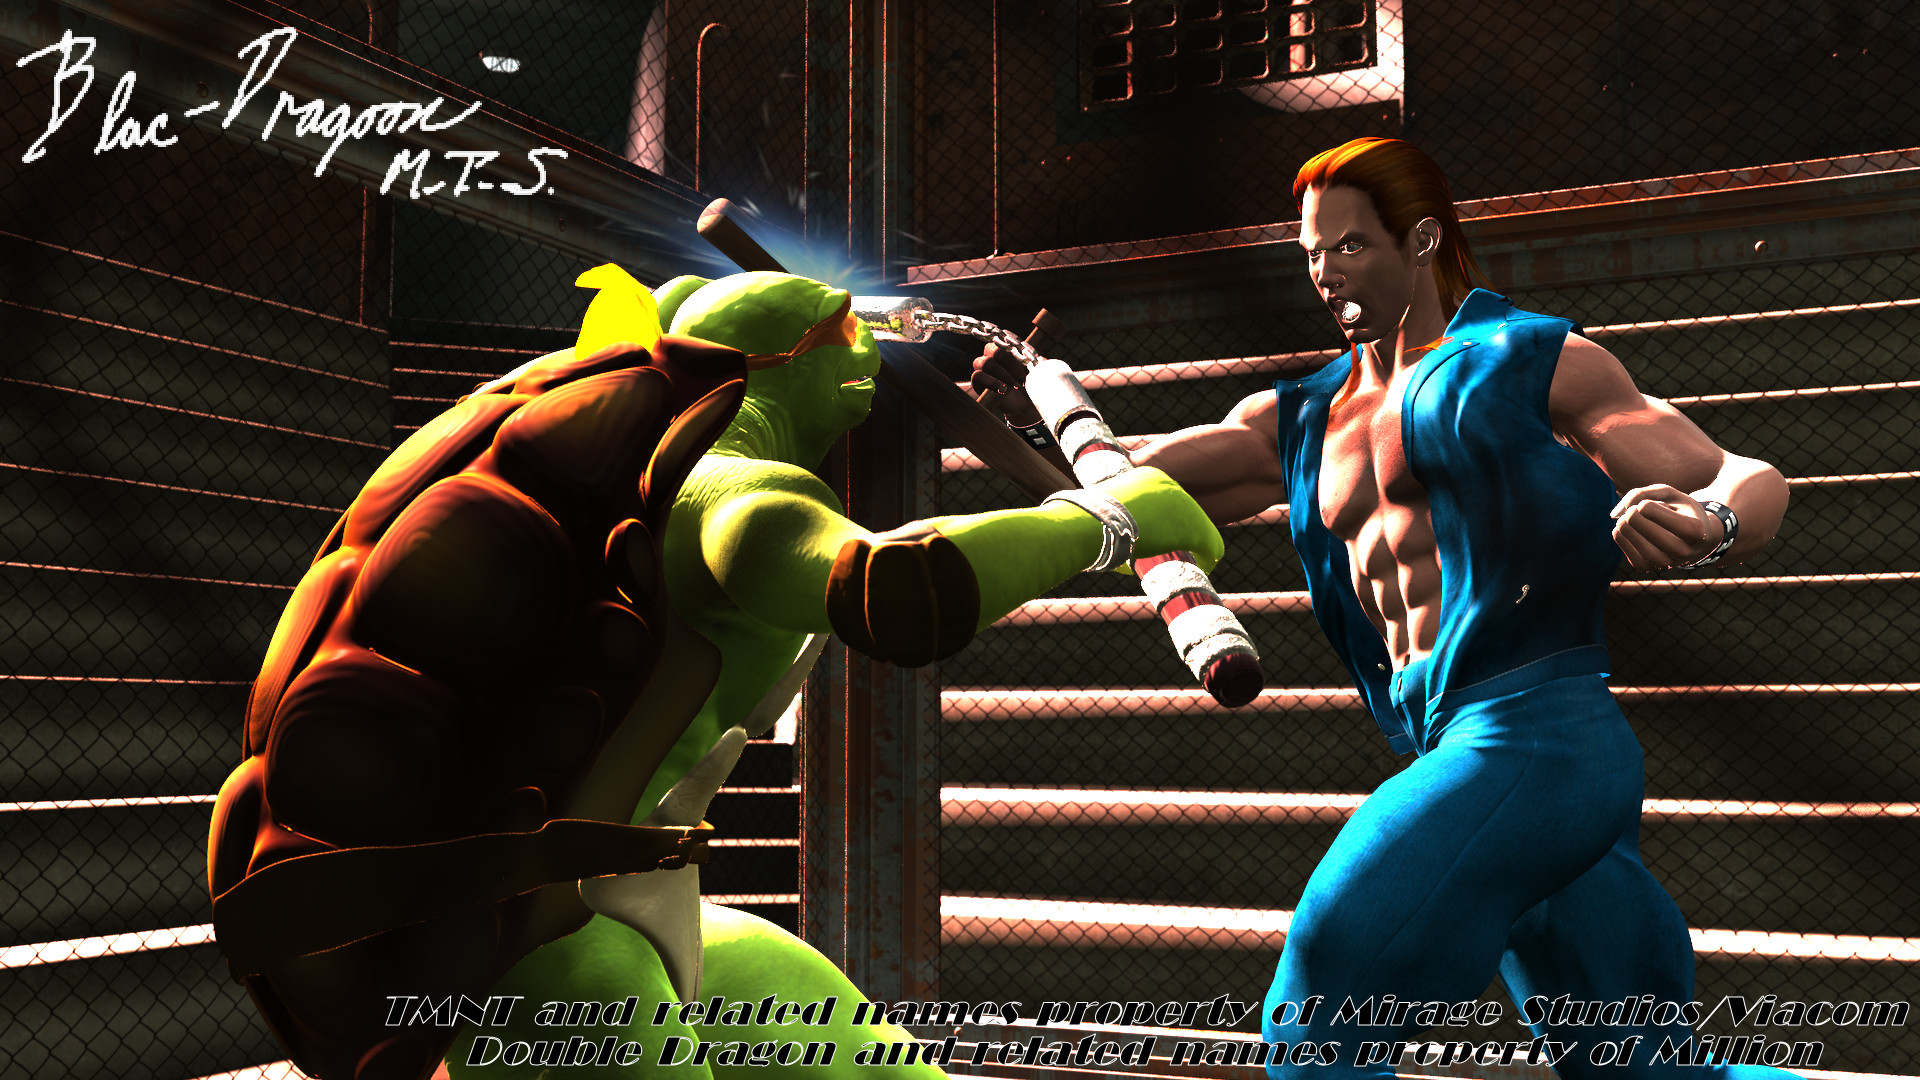 1920x1080 Double Dragon: Mikey/Roper Cage Match by Blac-Dragoon